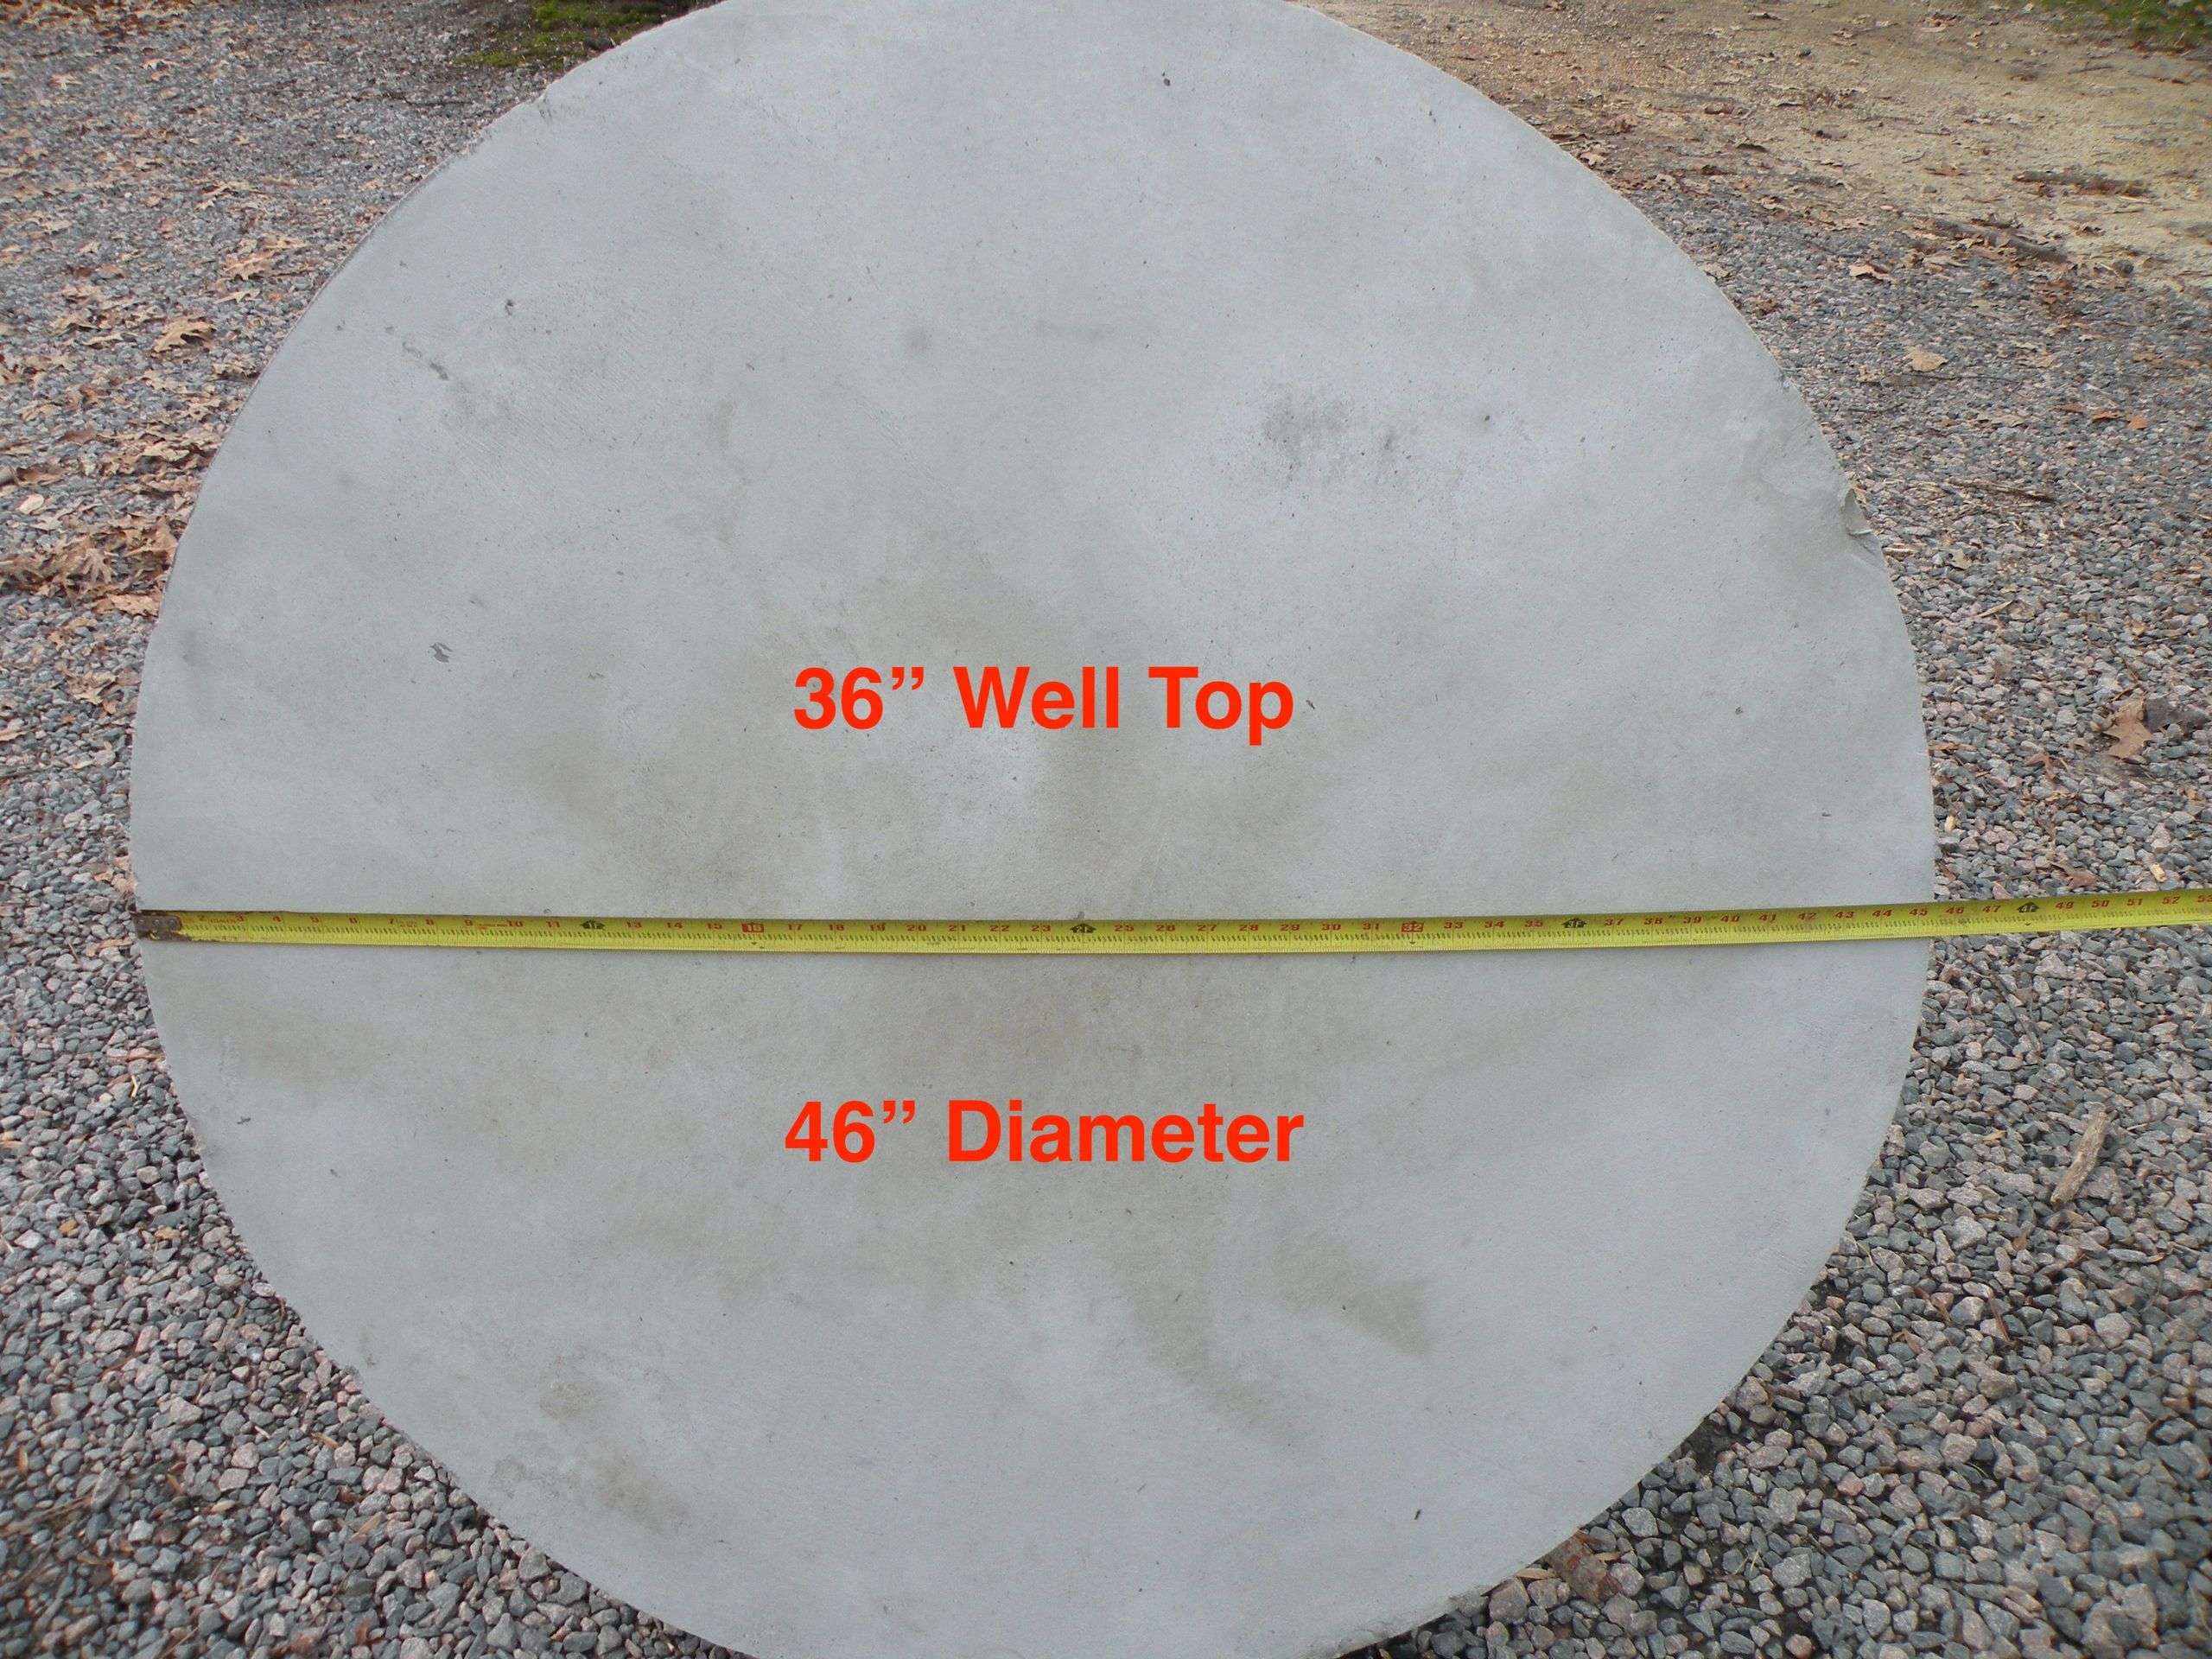 36" Well Top with 46" Diameter